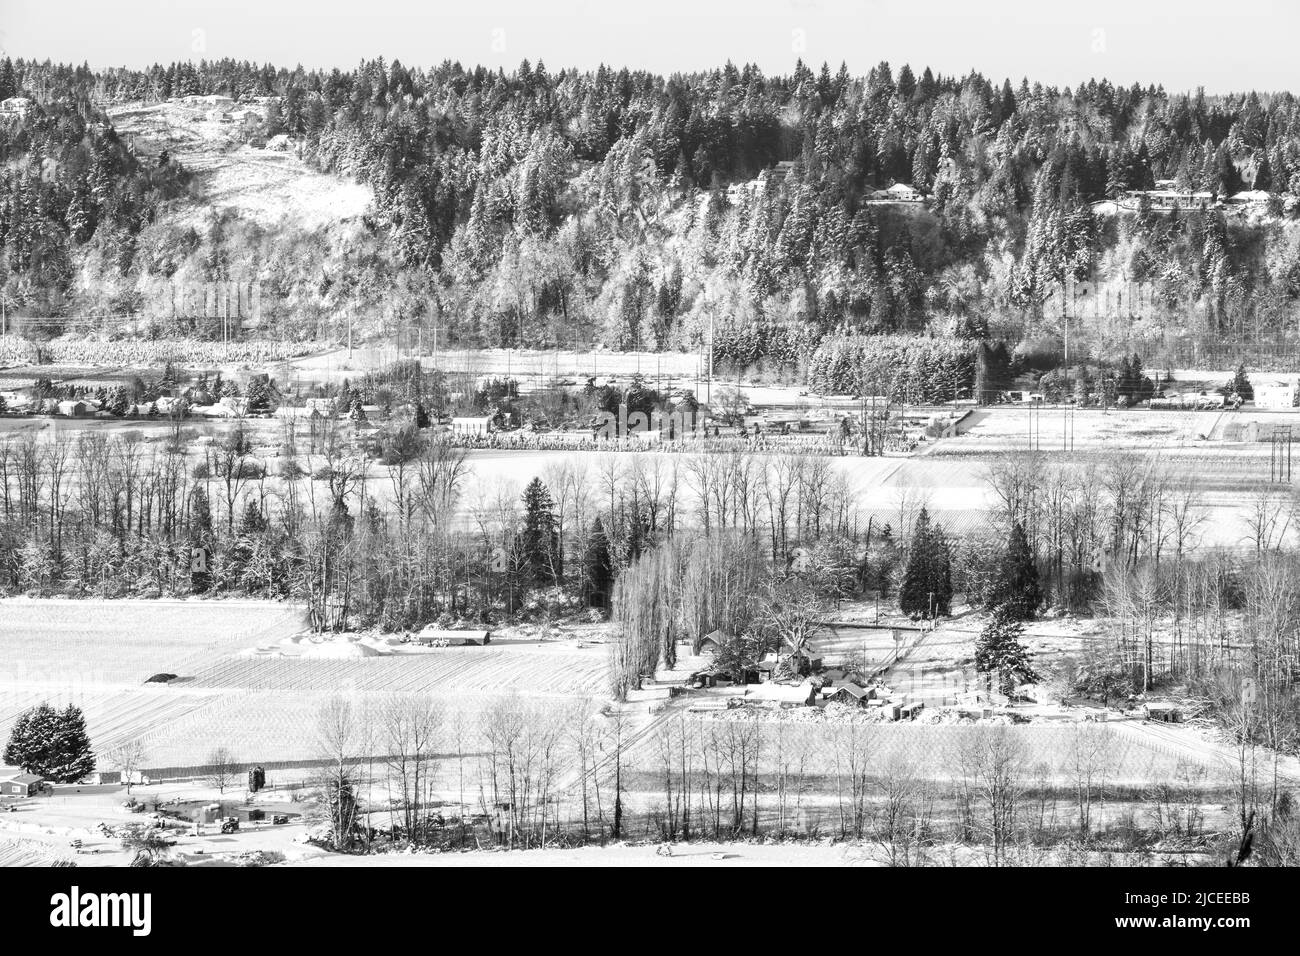 monochrome snow picture of a valley and hillside covered with evergreen trees along with farms Stock Photo